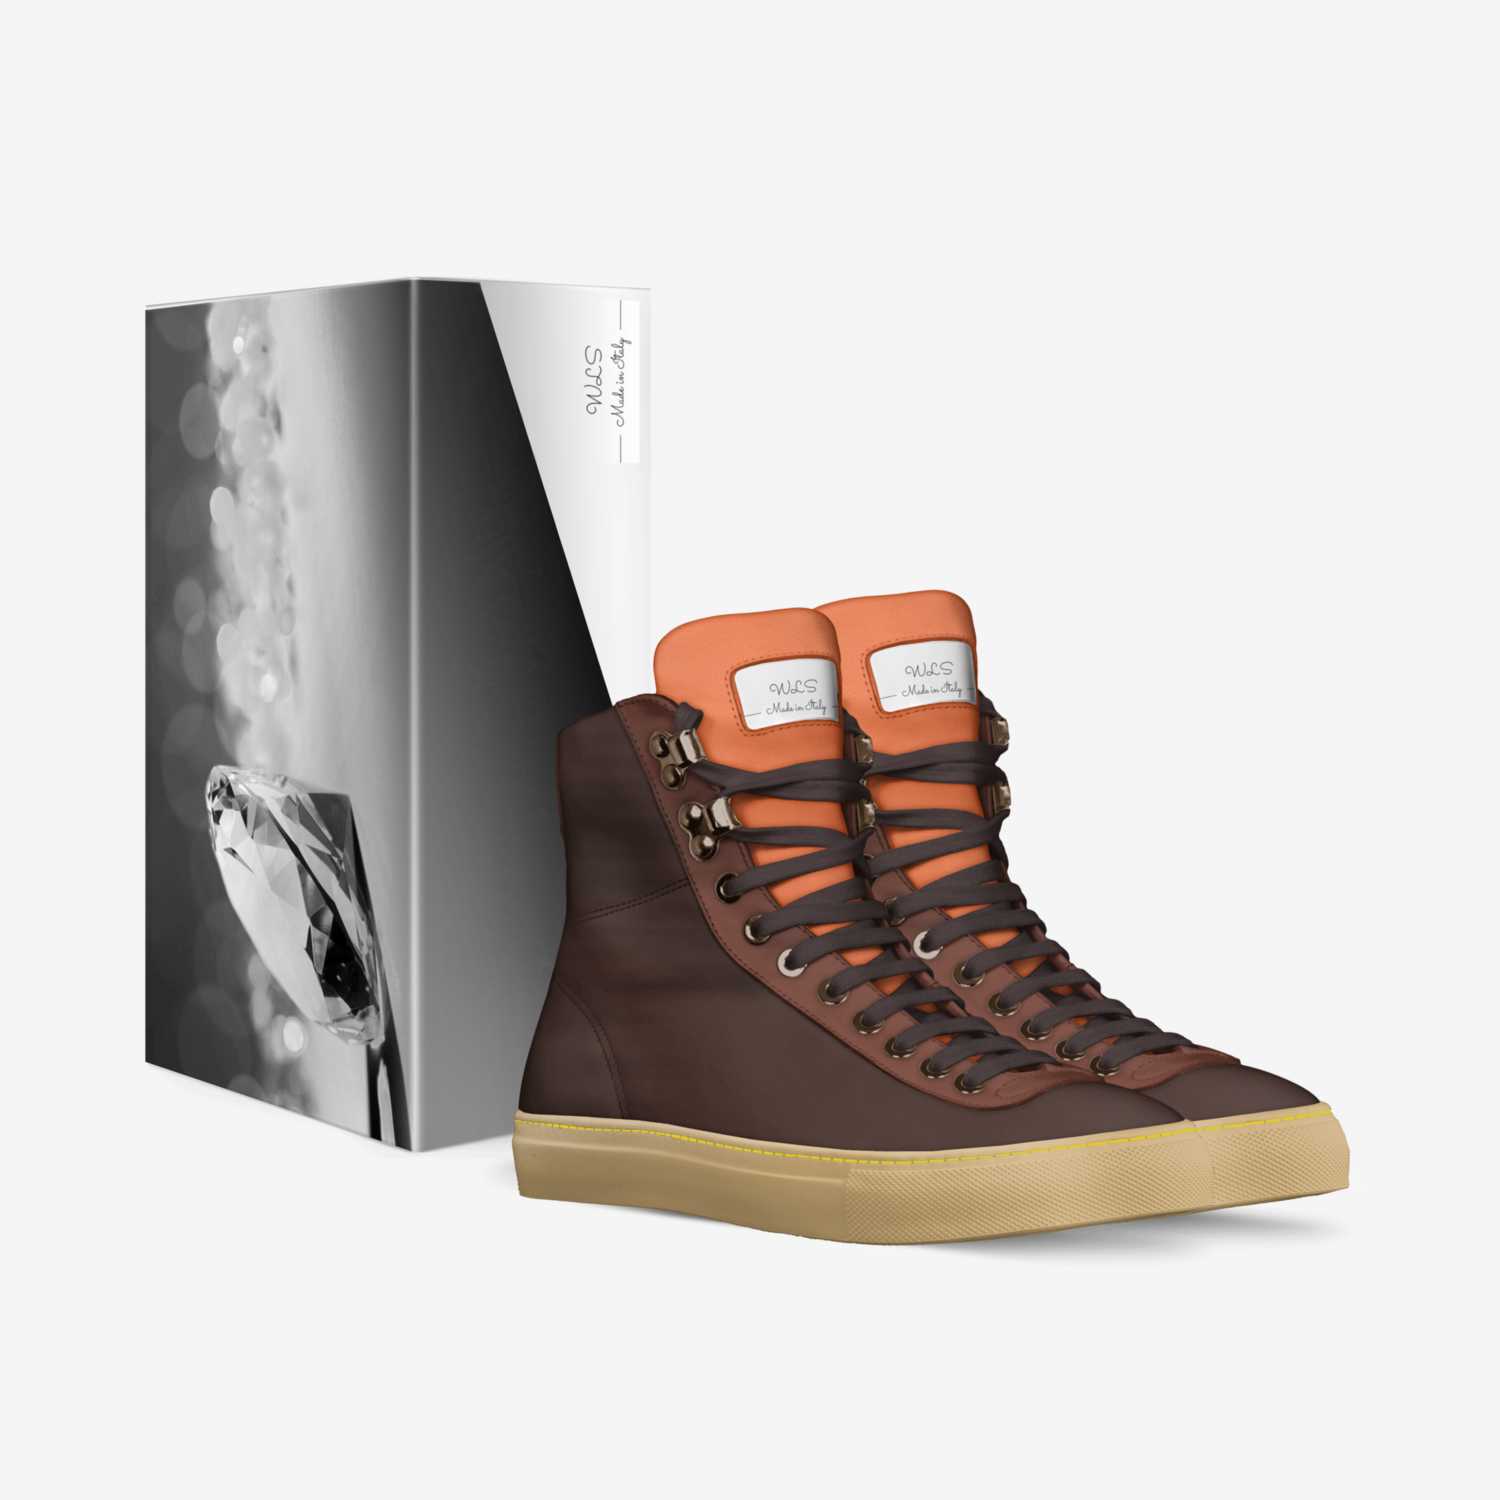 WLS custom made in Italy shoes by Joshua Logan | Box view